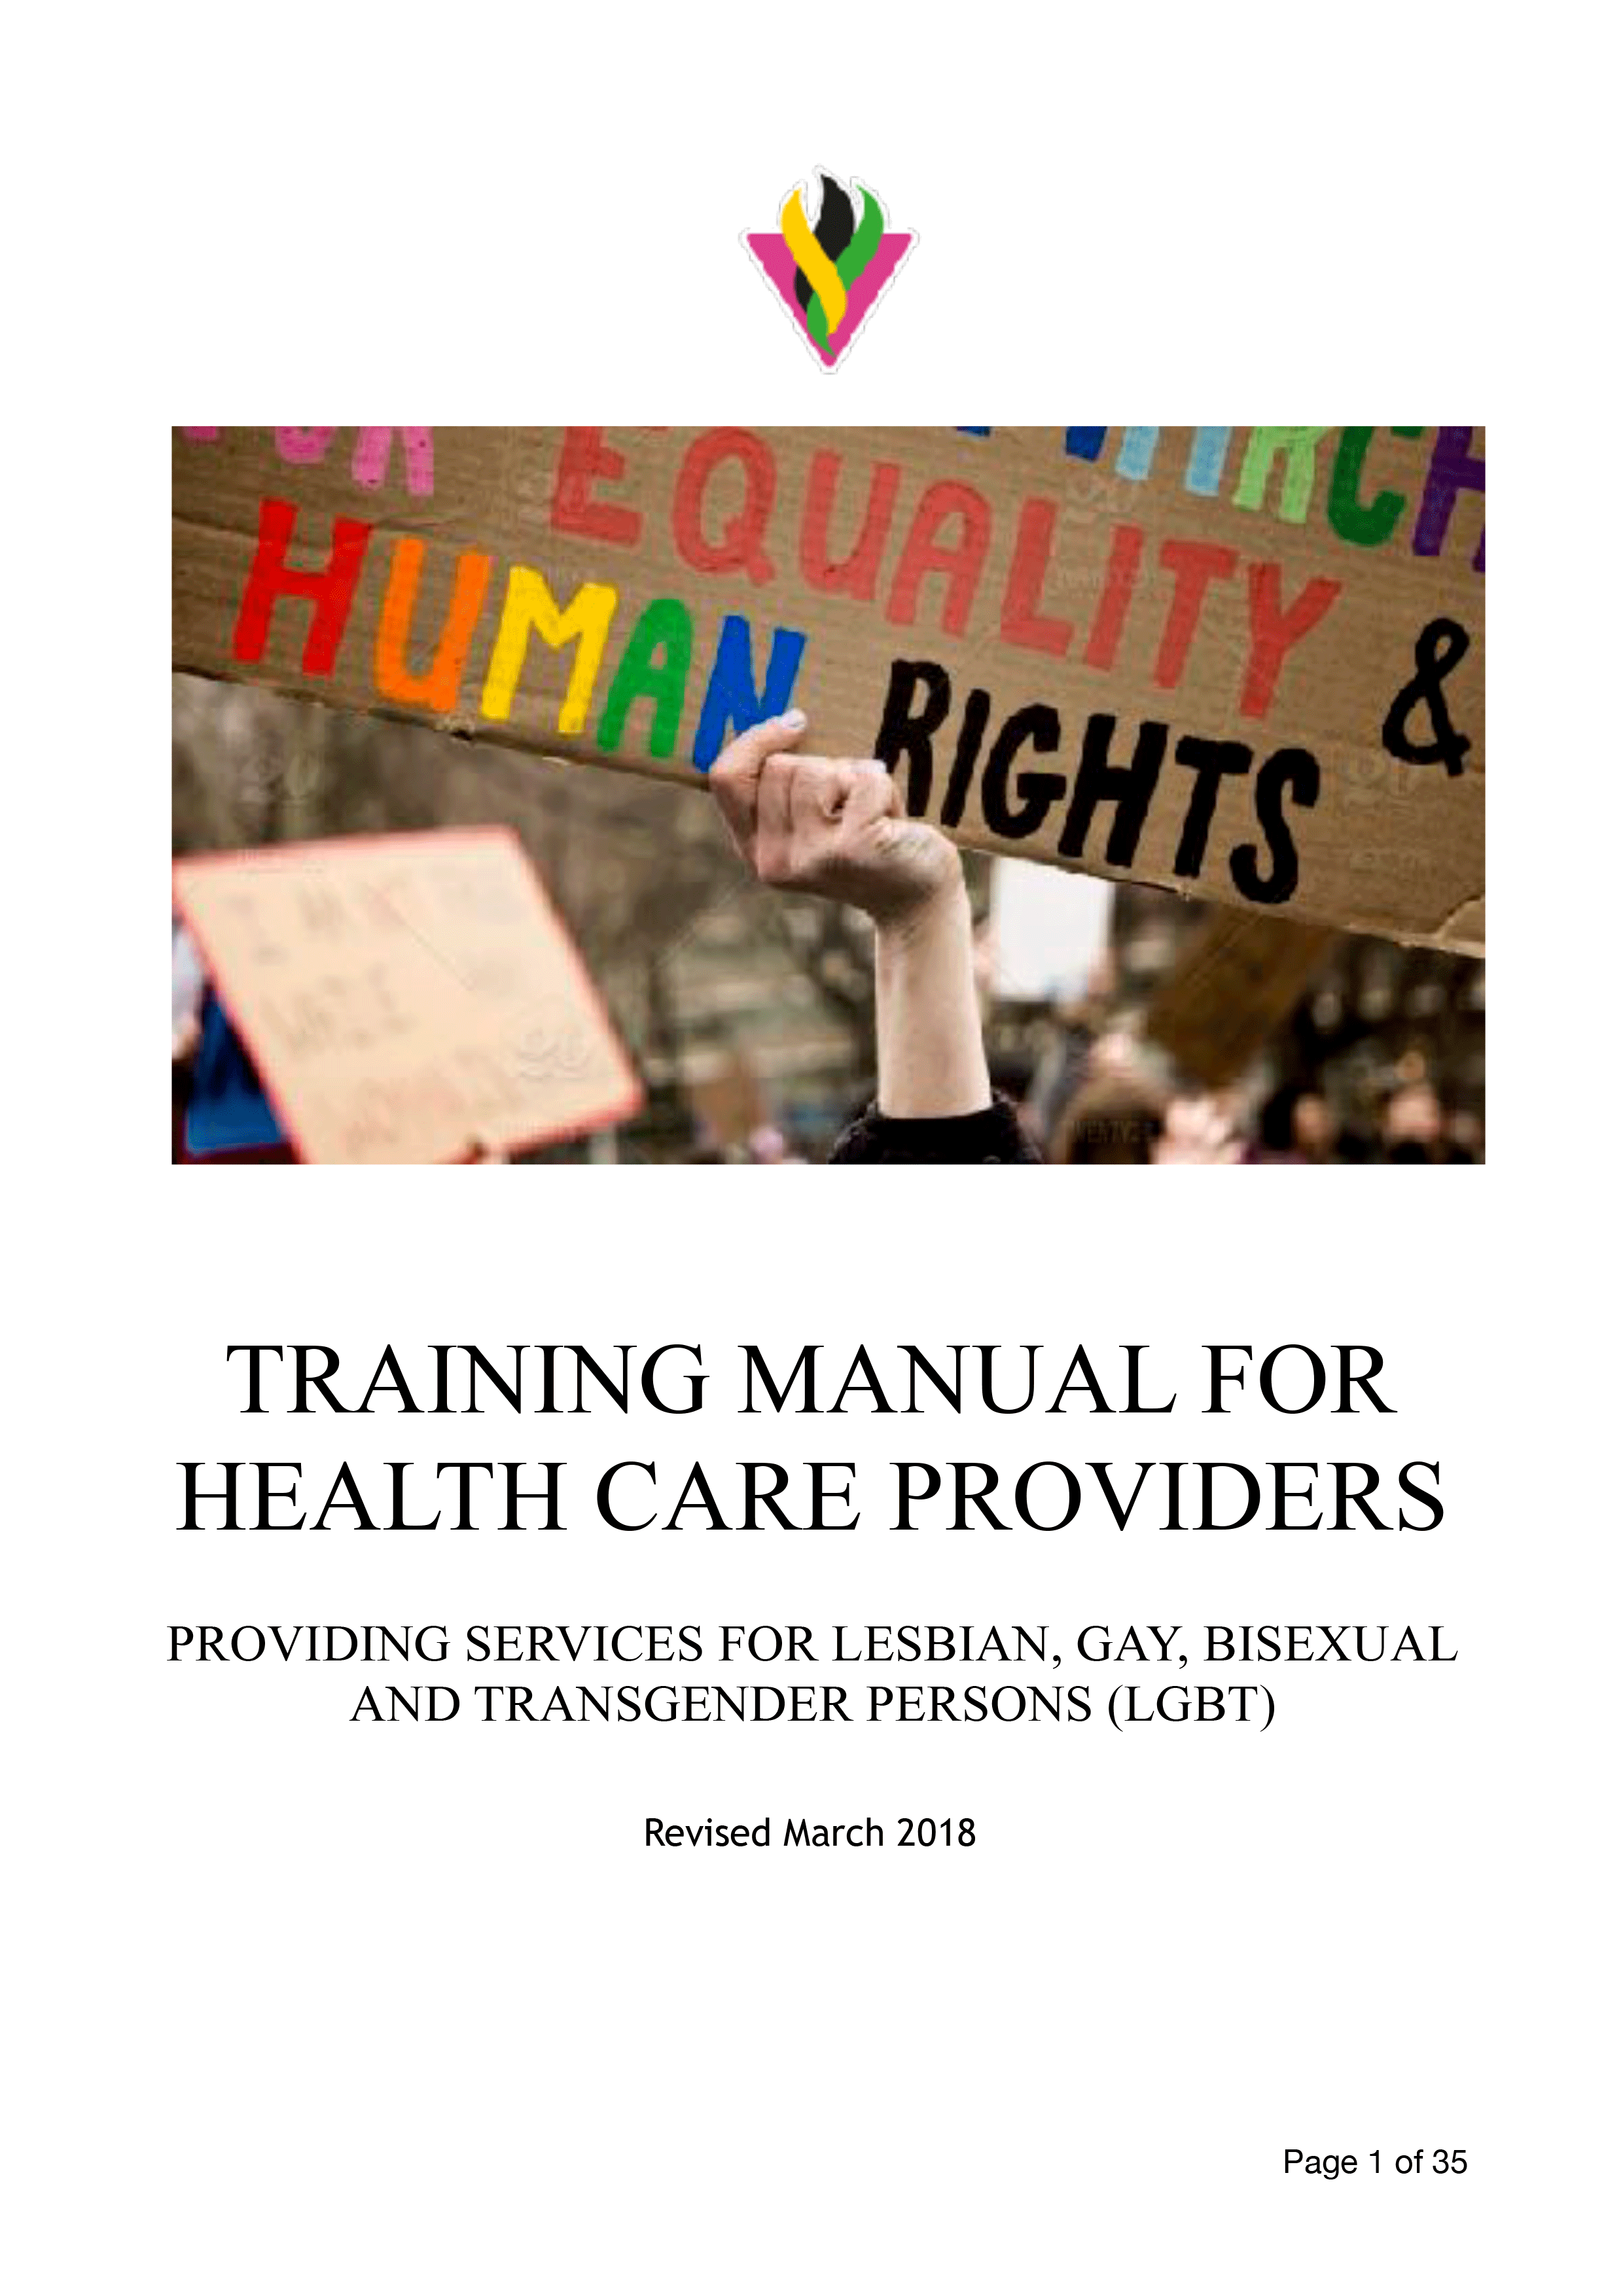 Training Manual for Healthcare Workers (March 2018)